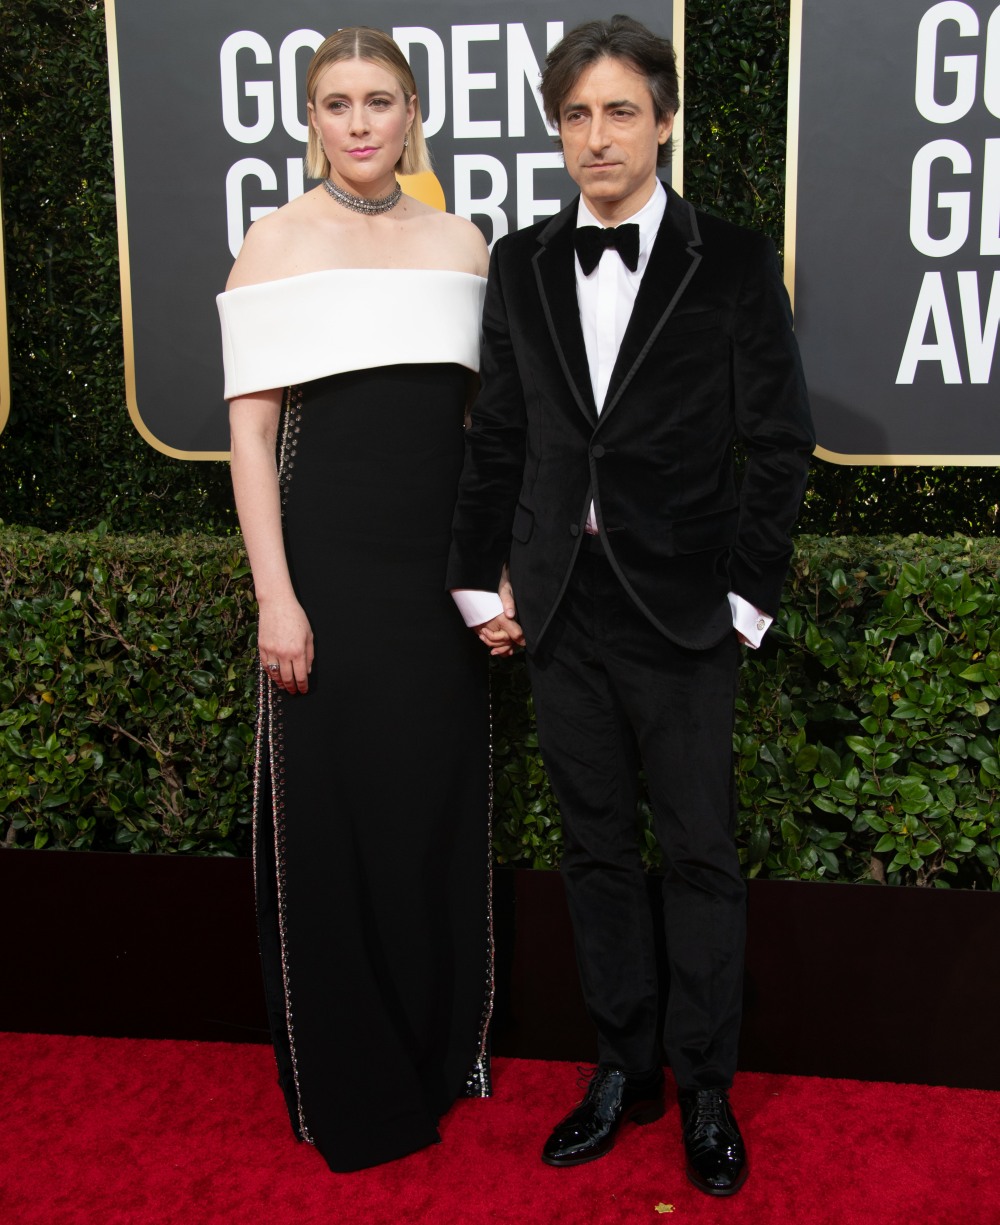 Greta Gerwig and nominee Noah Baumbach arrive at the 77th Annual Golden Globe Awards at the Beverly Hilton in Beverly Hills, CA on Sunday, January 5, 2020.